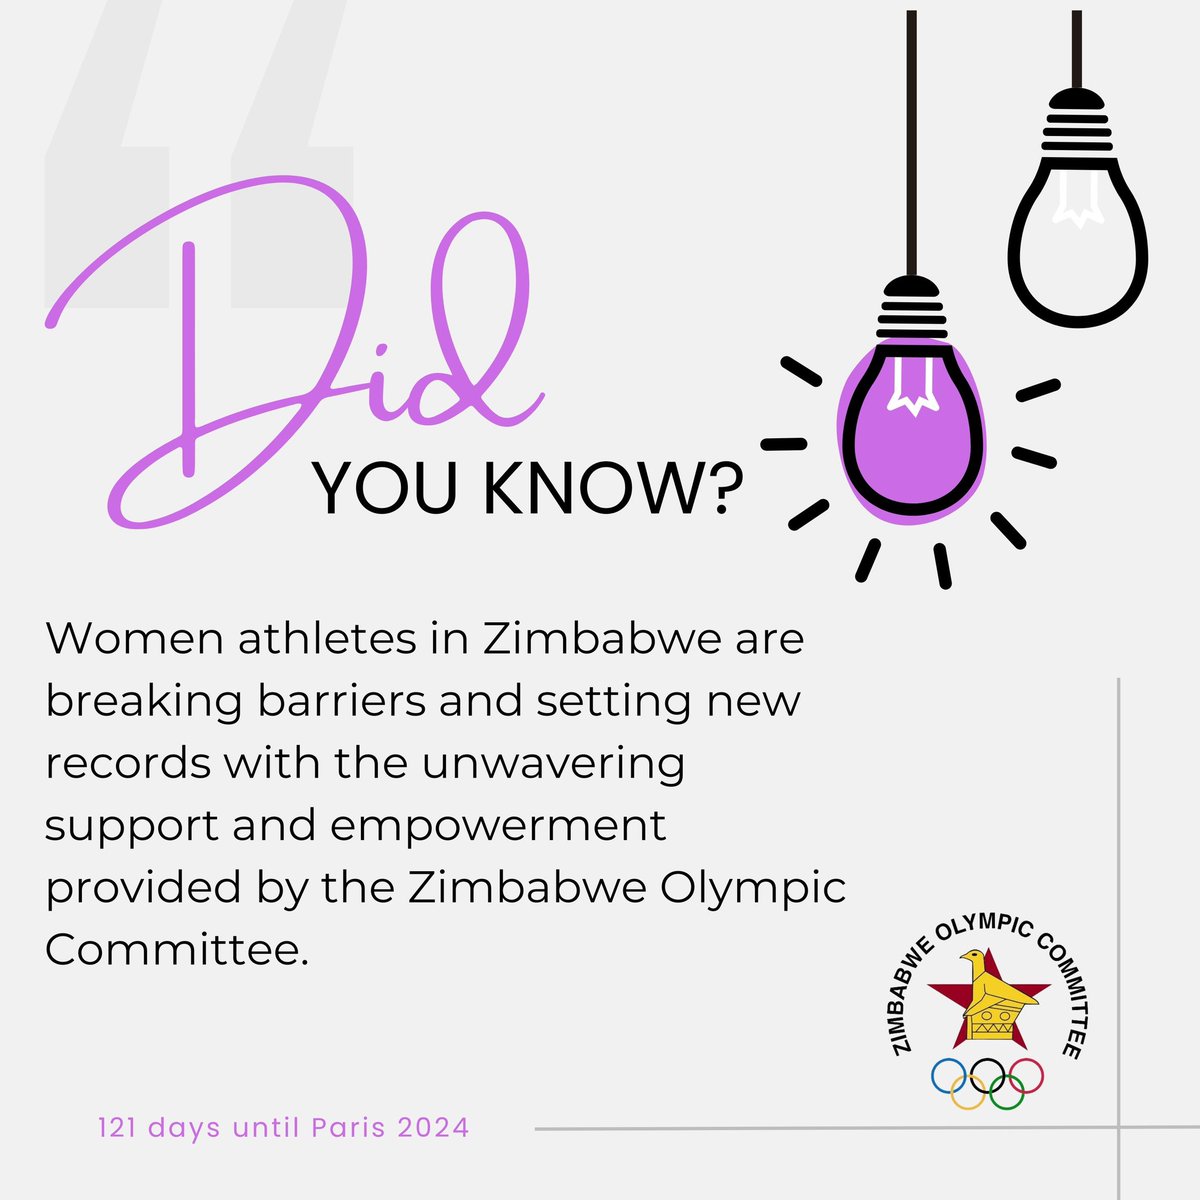 Empowered by ZOC, Zimbabwean women athletes are rewriting history and breaking barriers! 🏅✨ #WomensMonth #WomenInSports #Empowerment